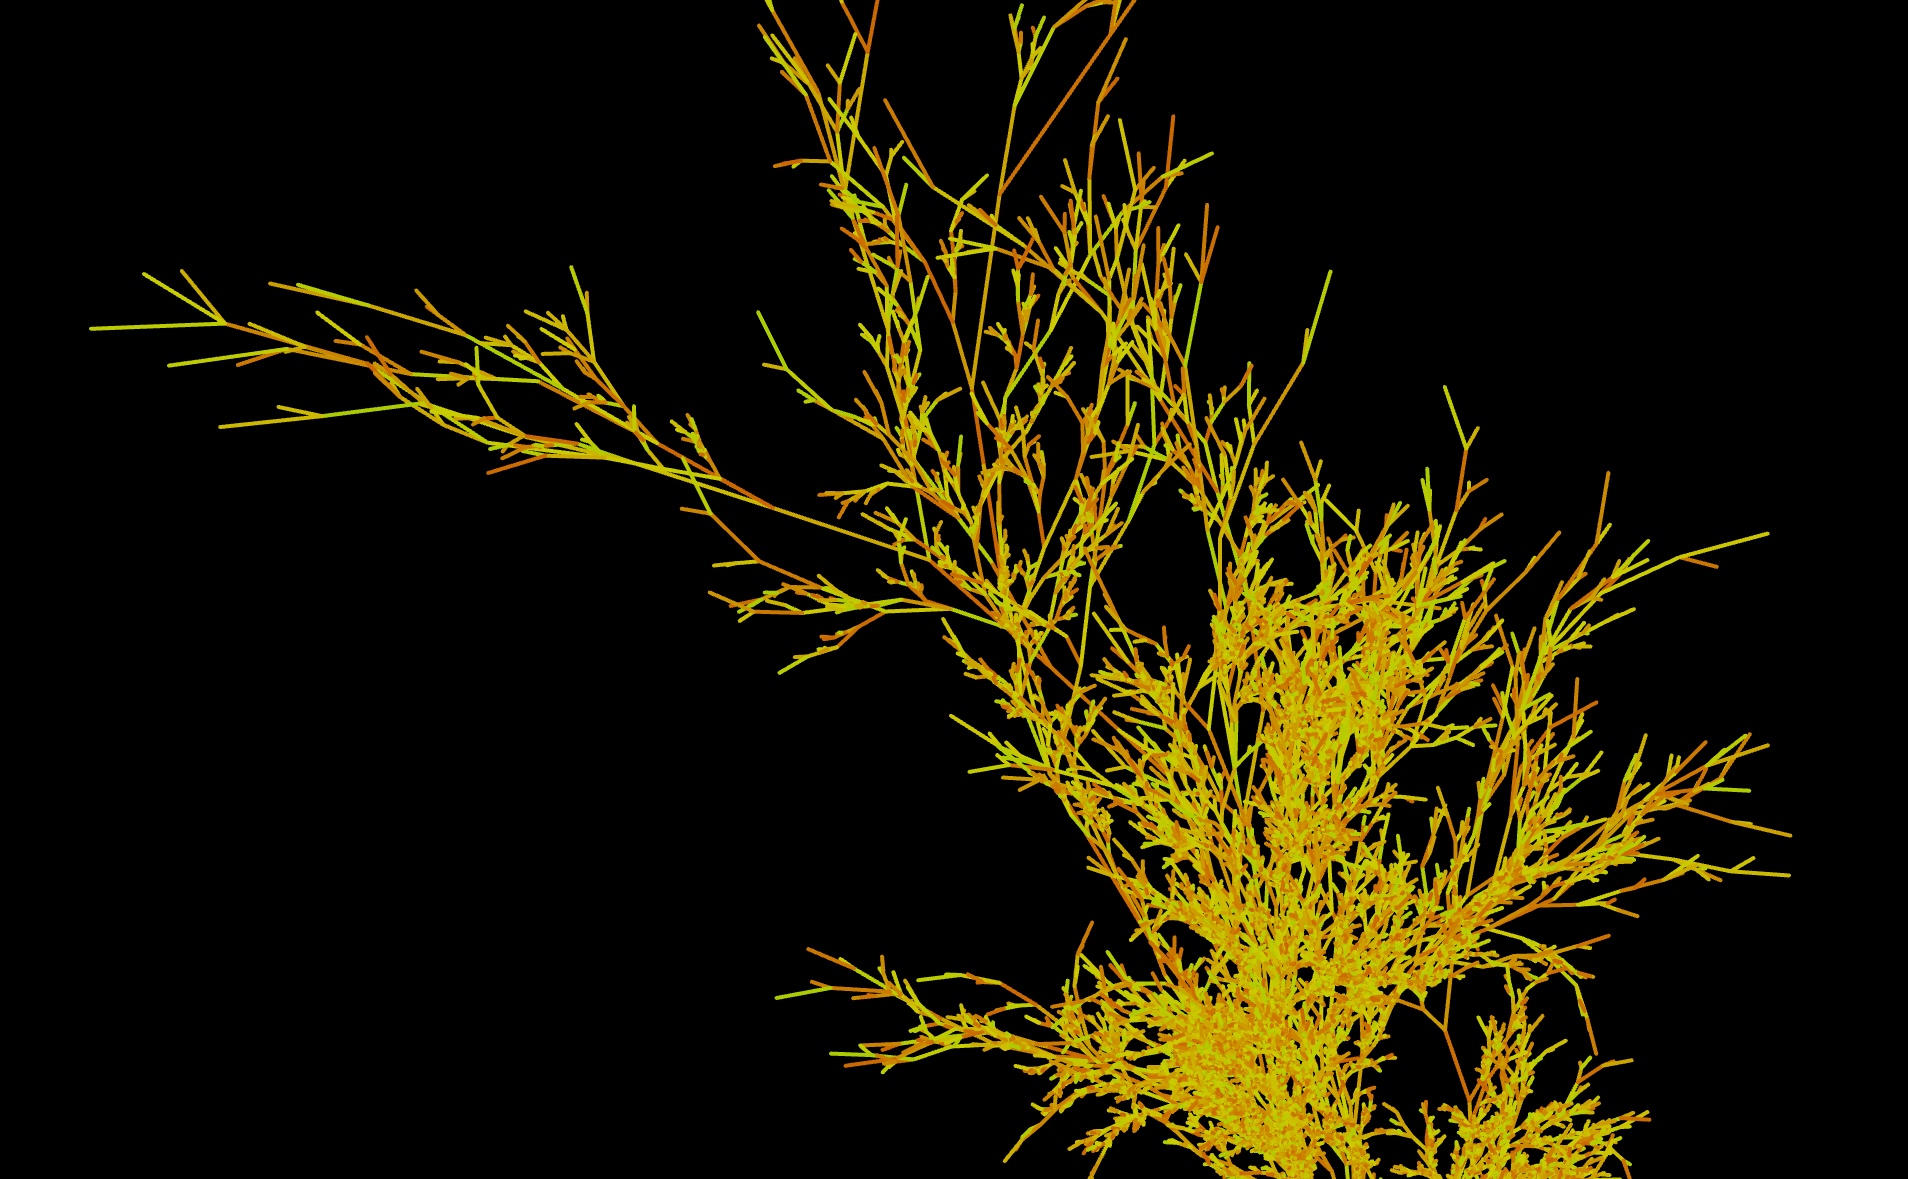 A computer-generated image of a branching tree, in autumnal shades